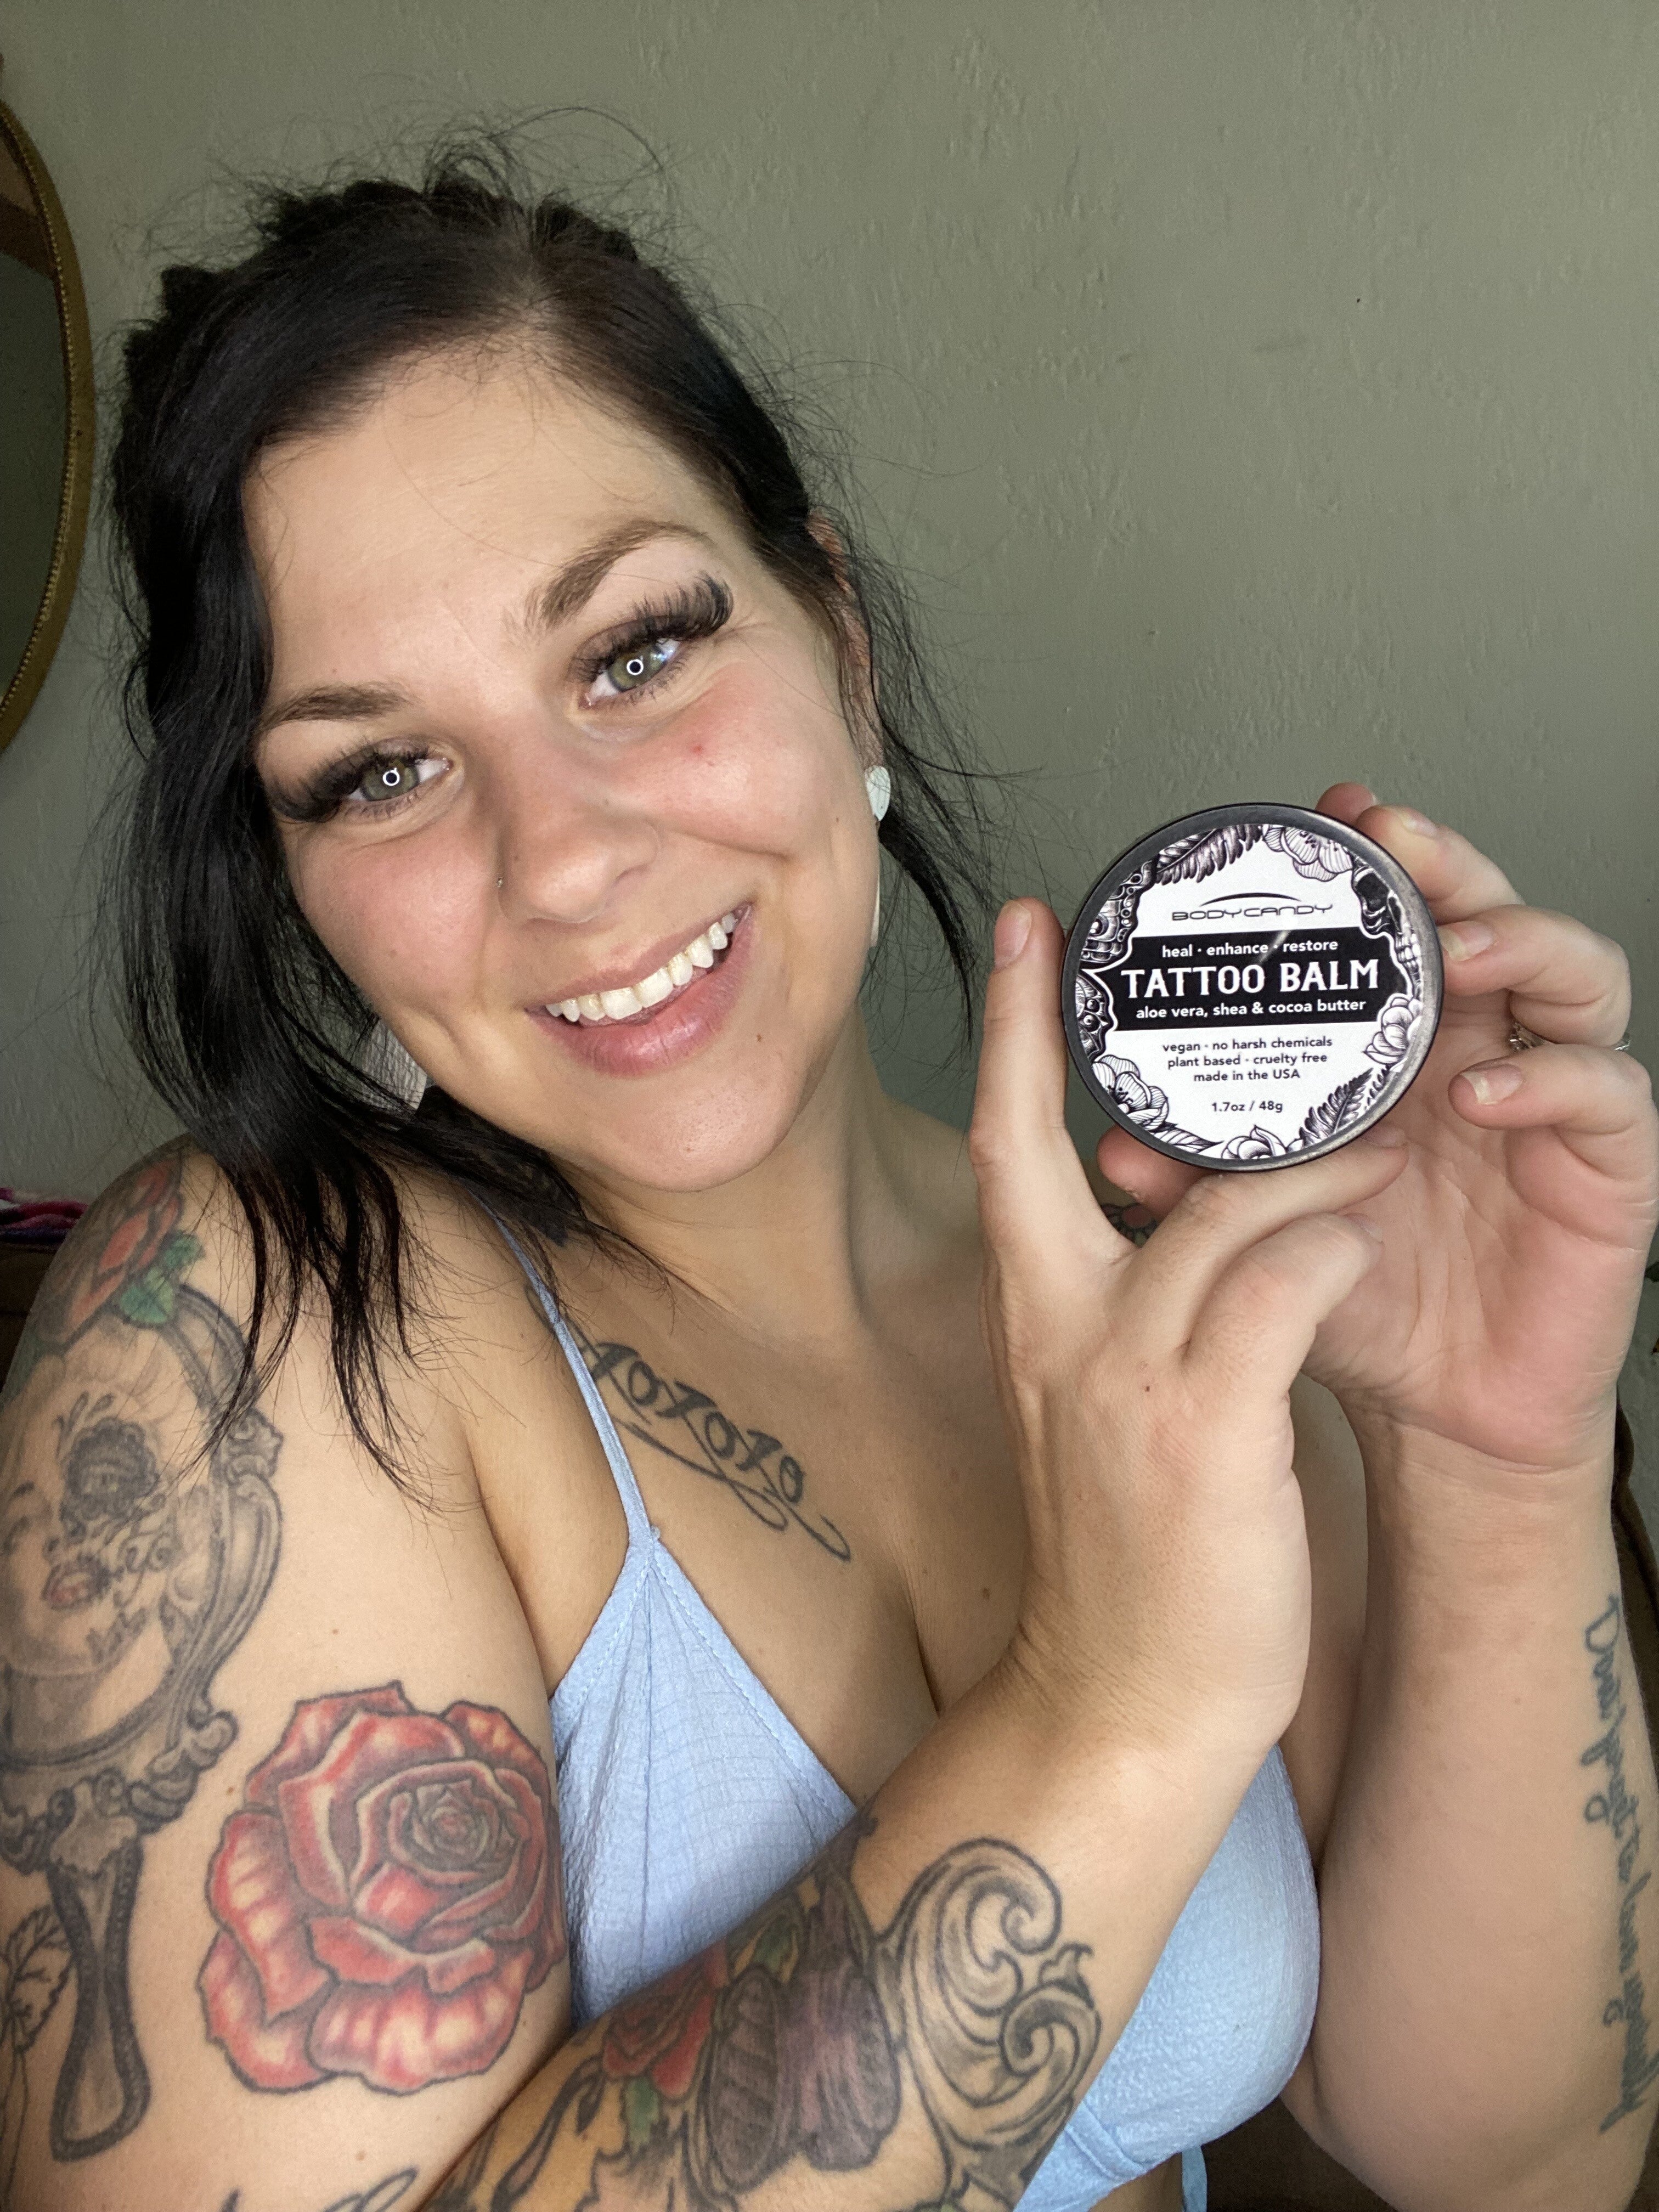 Body Candy Tattoo Aftercare Tattoo Balm